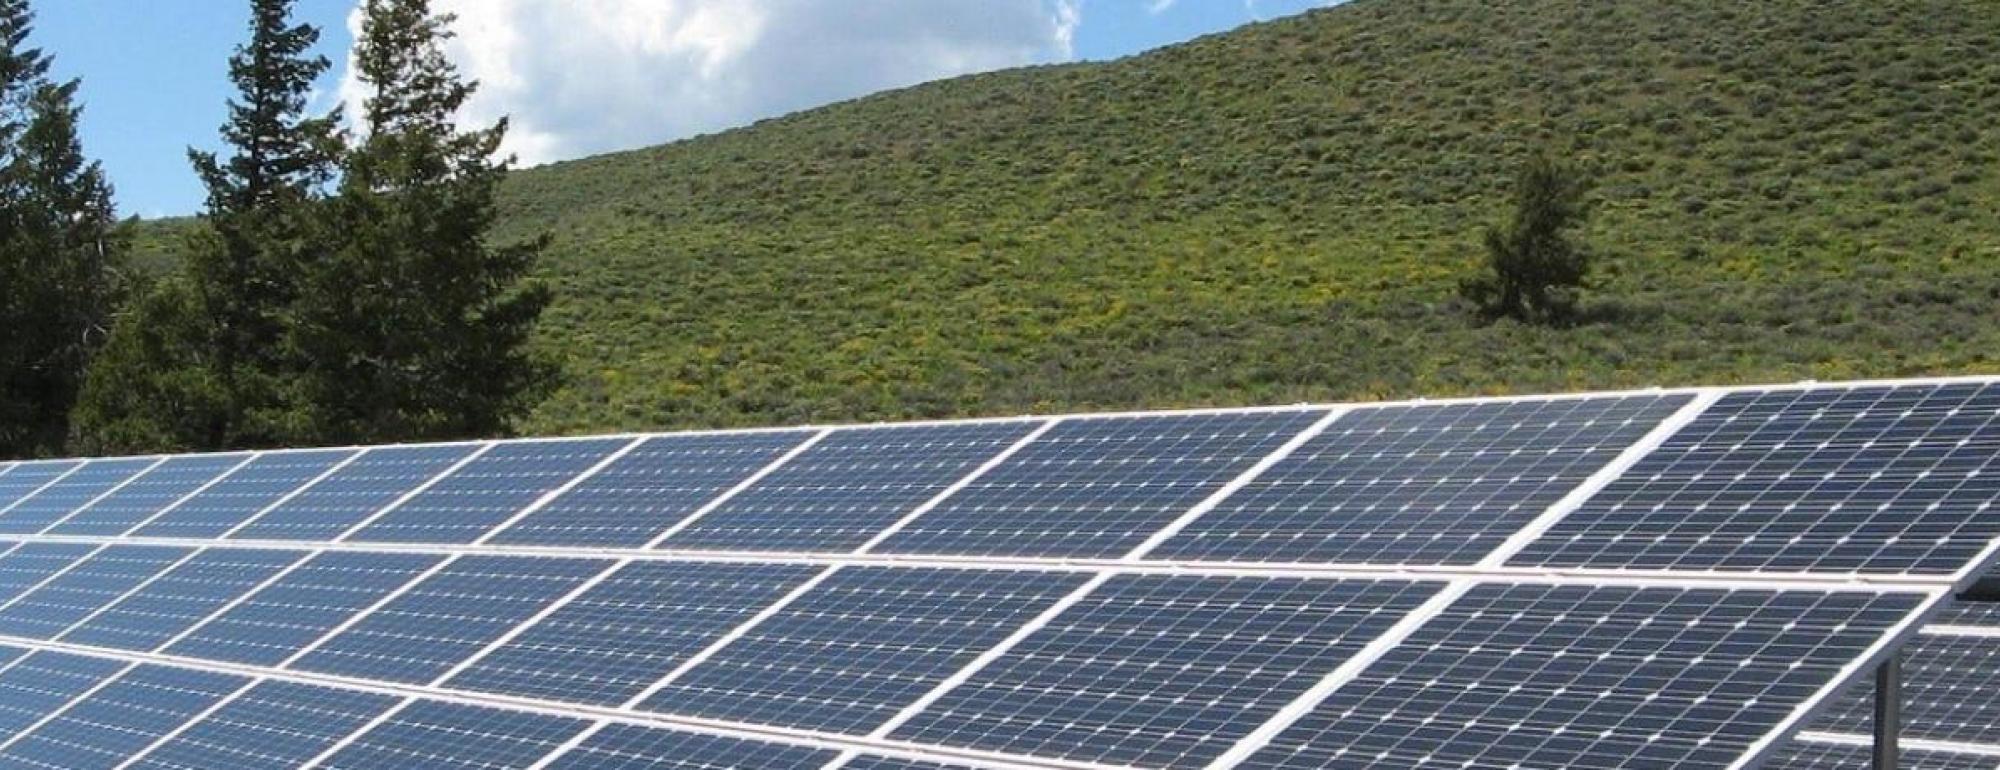 solar panels near hill with trees